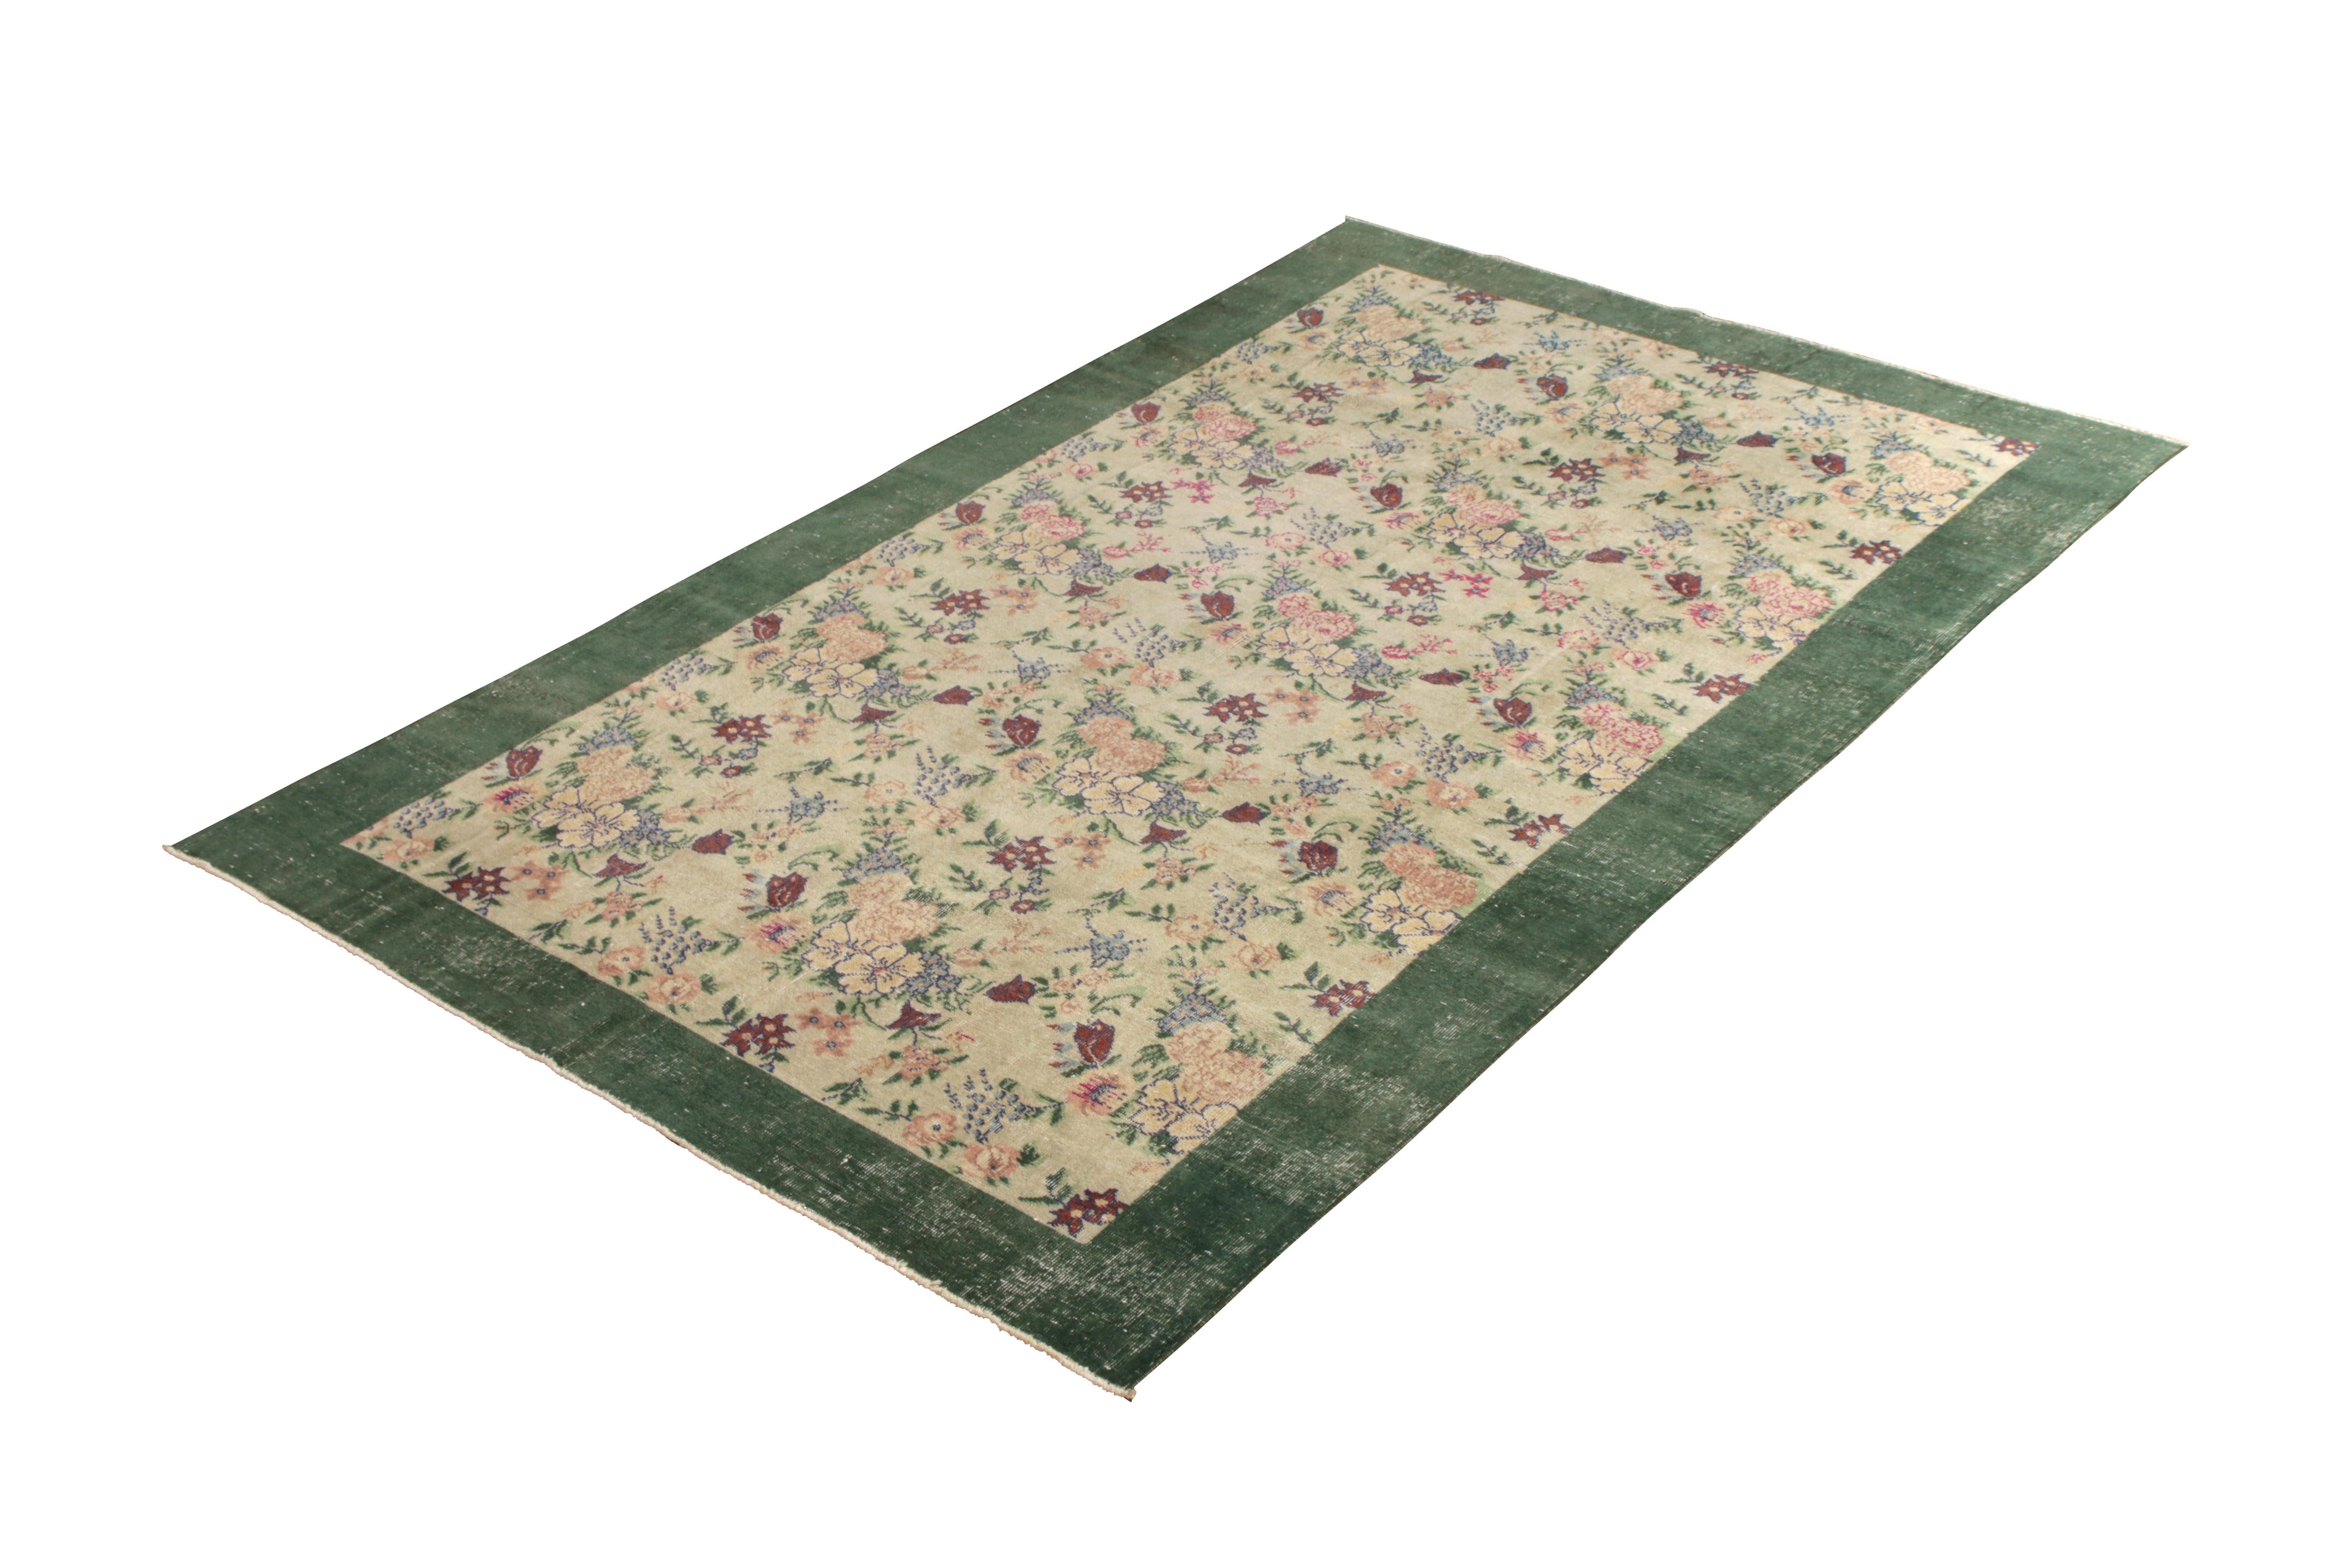 Hand knotted in wool originating from Turkey circa 1960-1960, this item is a vintage rug with a mid-century sensibility suspected to remark the works of celebrated Turkish icon Zeki Müren, who favored the European sensibilities and open border like